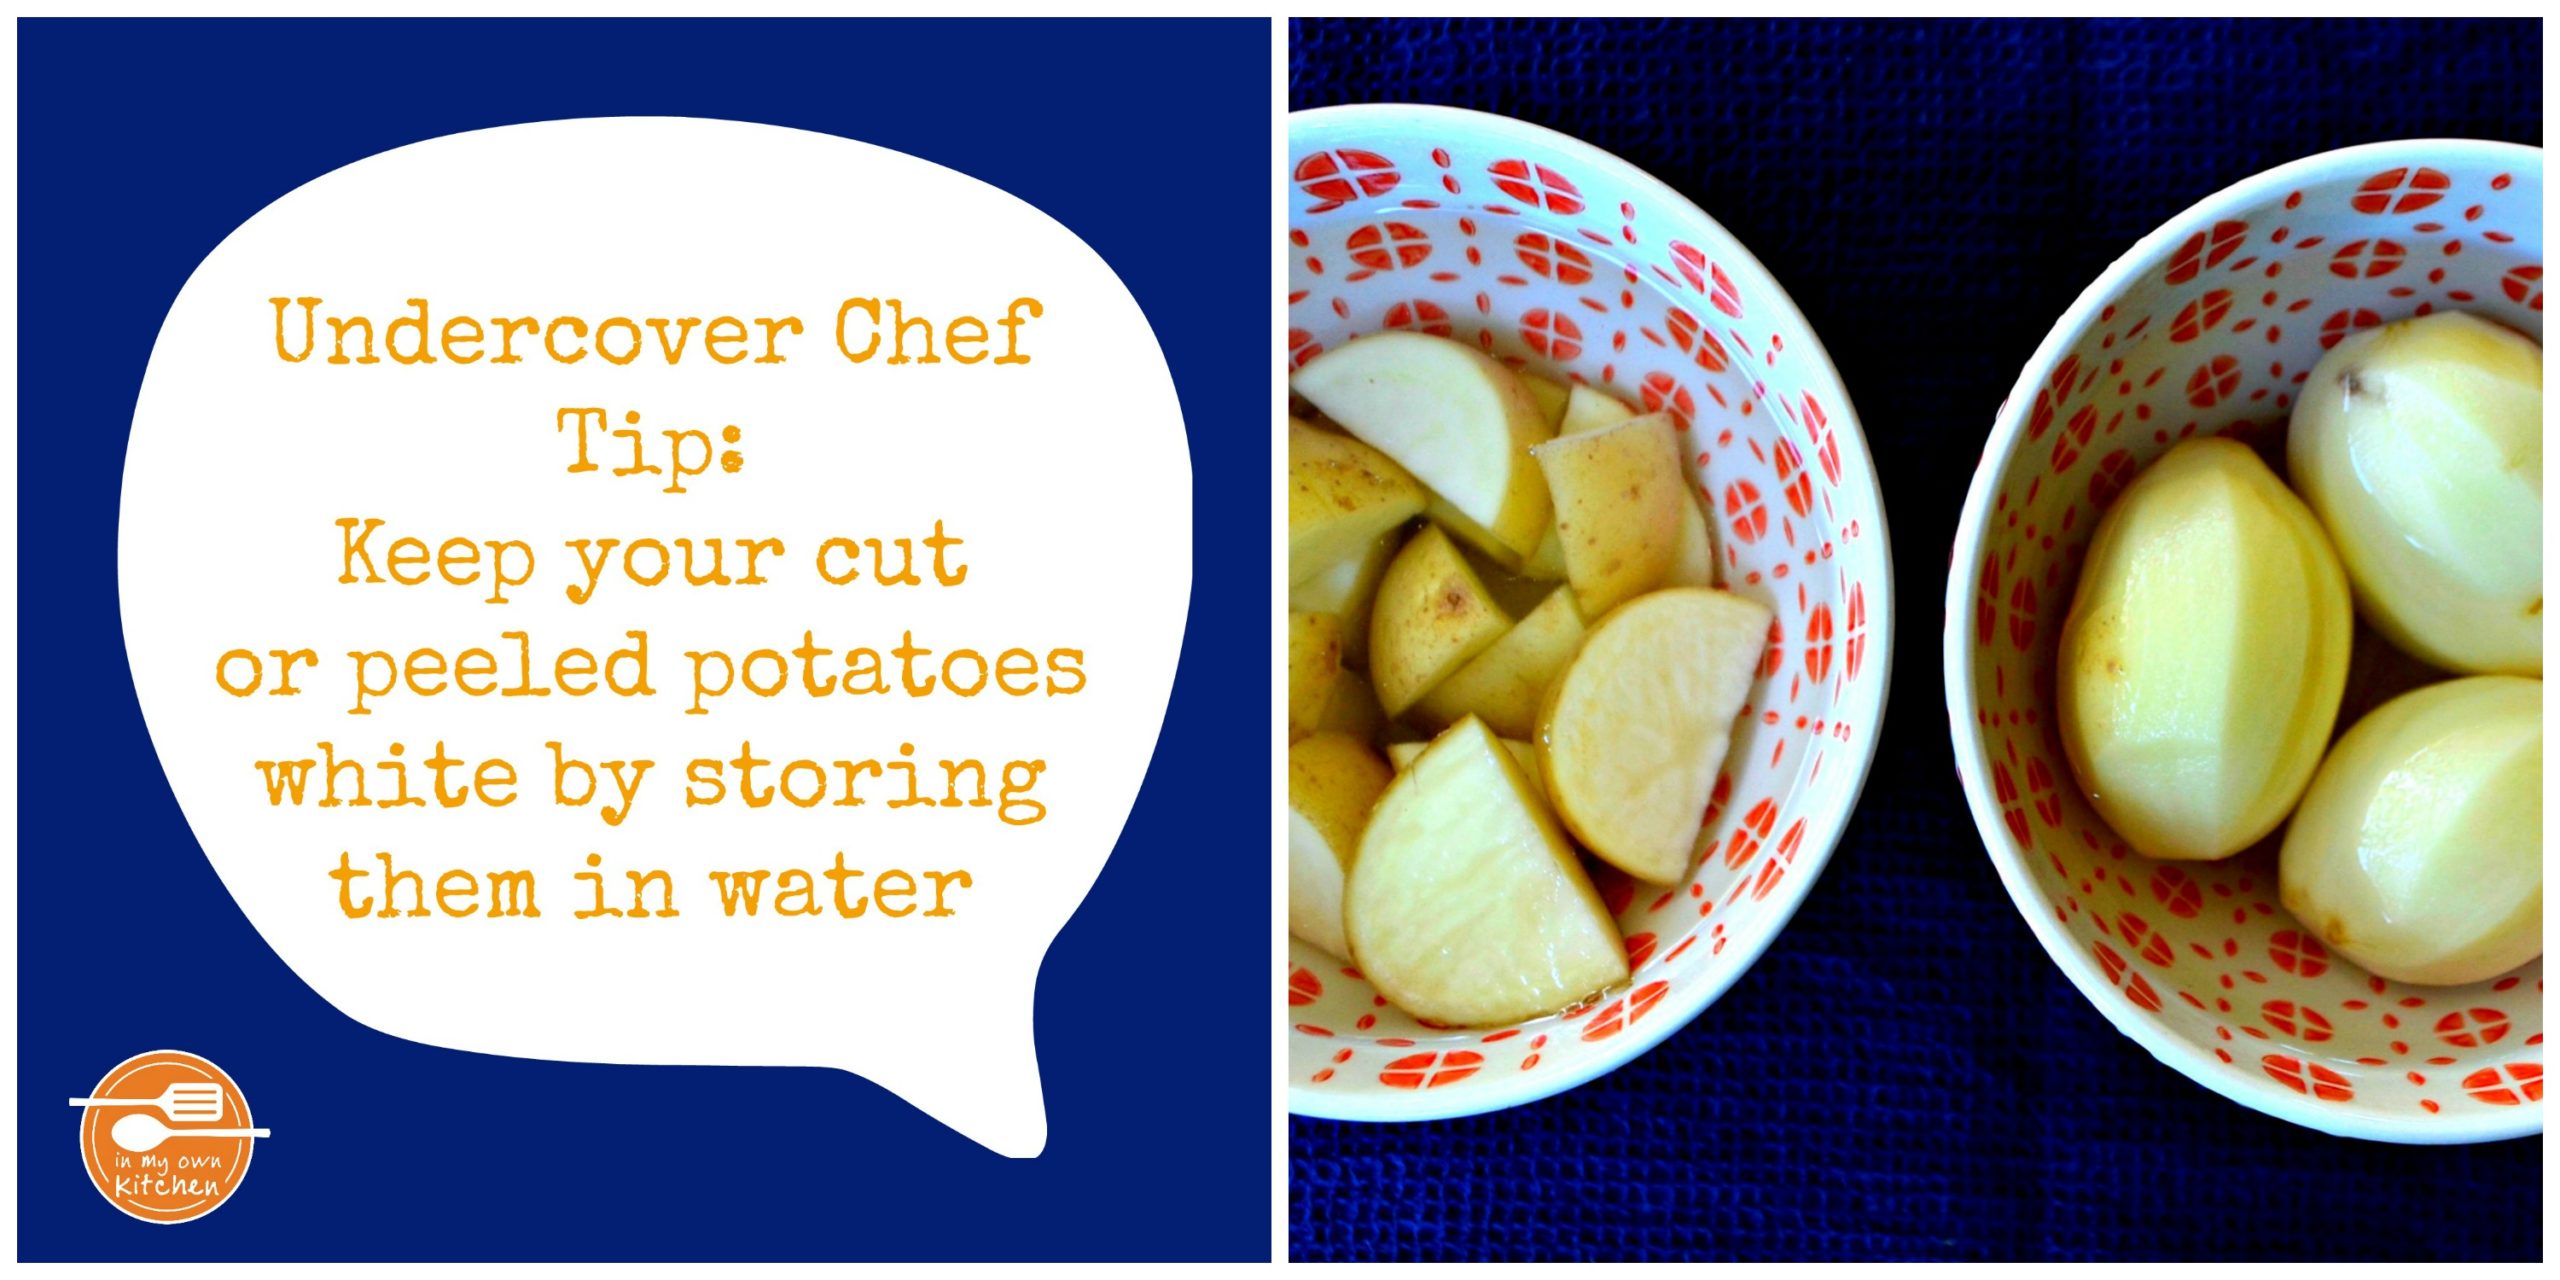 Undercover Chef Tip Potatoes